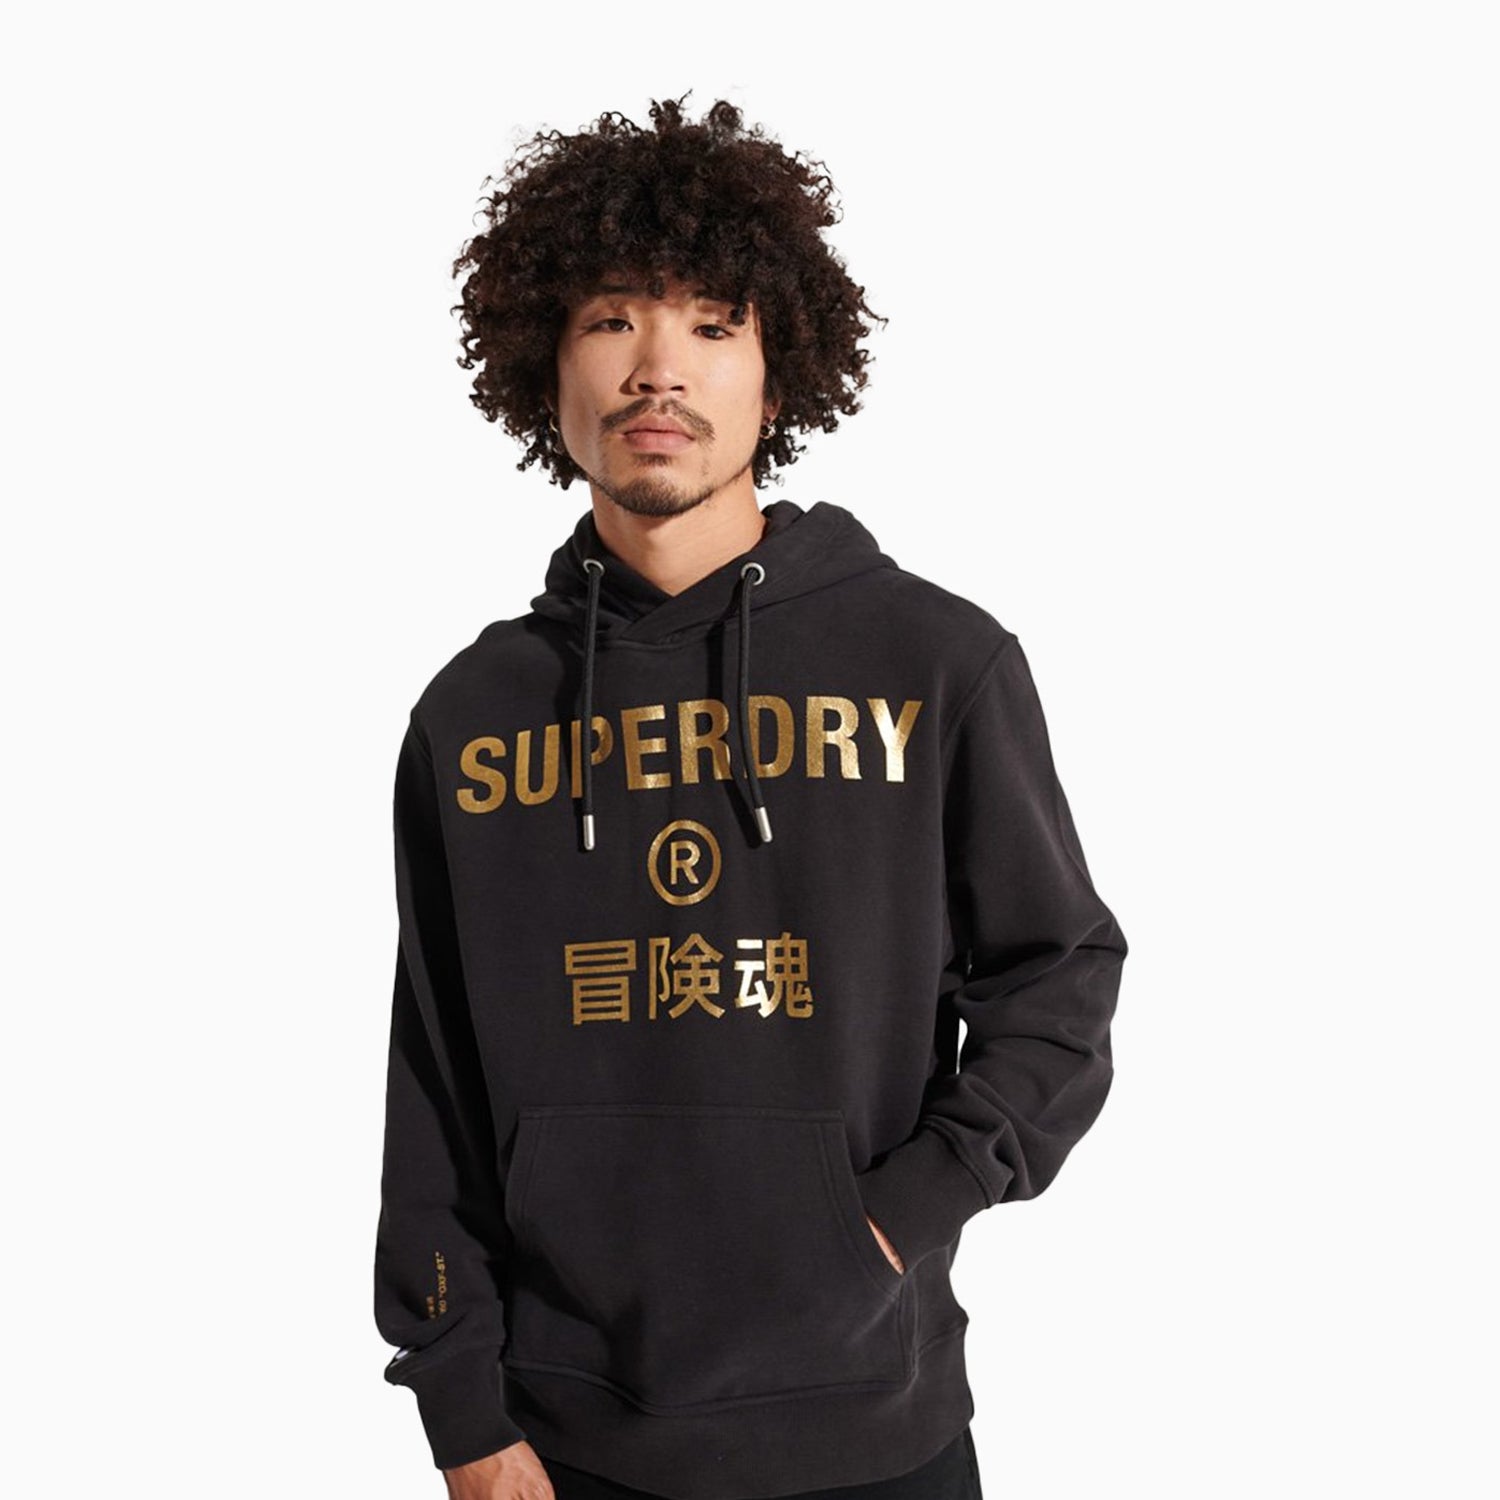 superdry-mens-corporate-logo-foil-pull-over-hoodie-m2011742a-02a